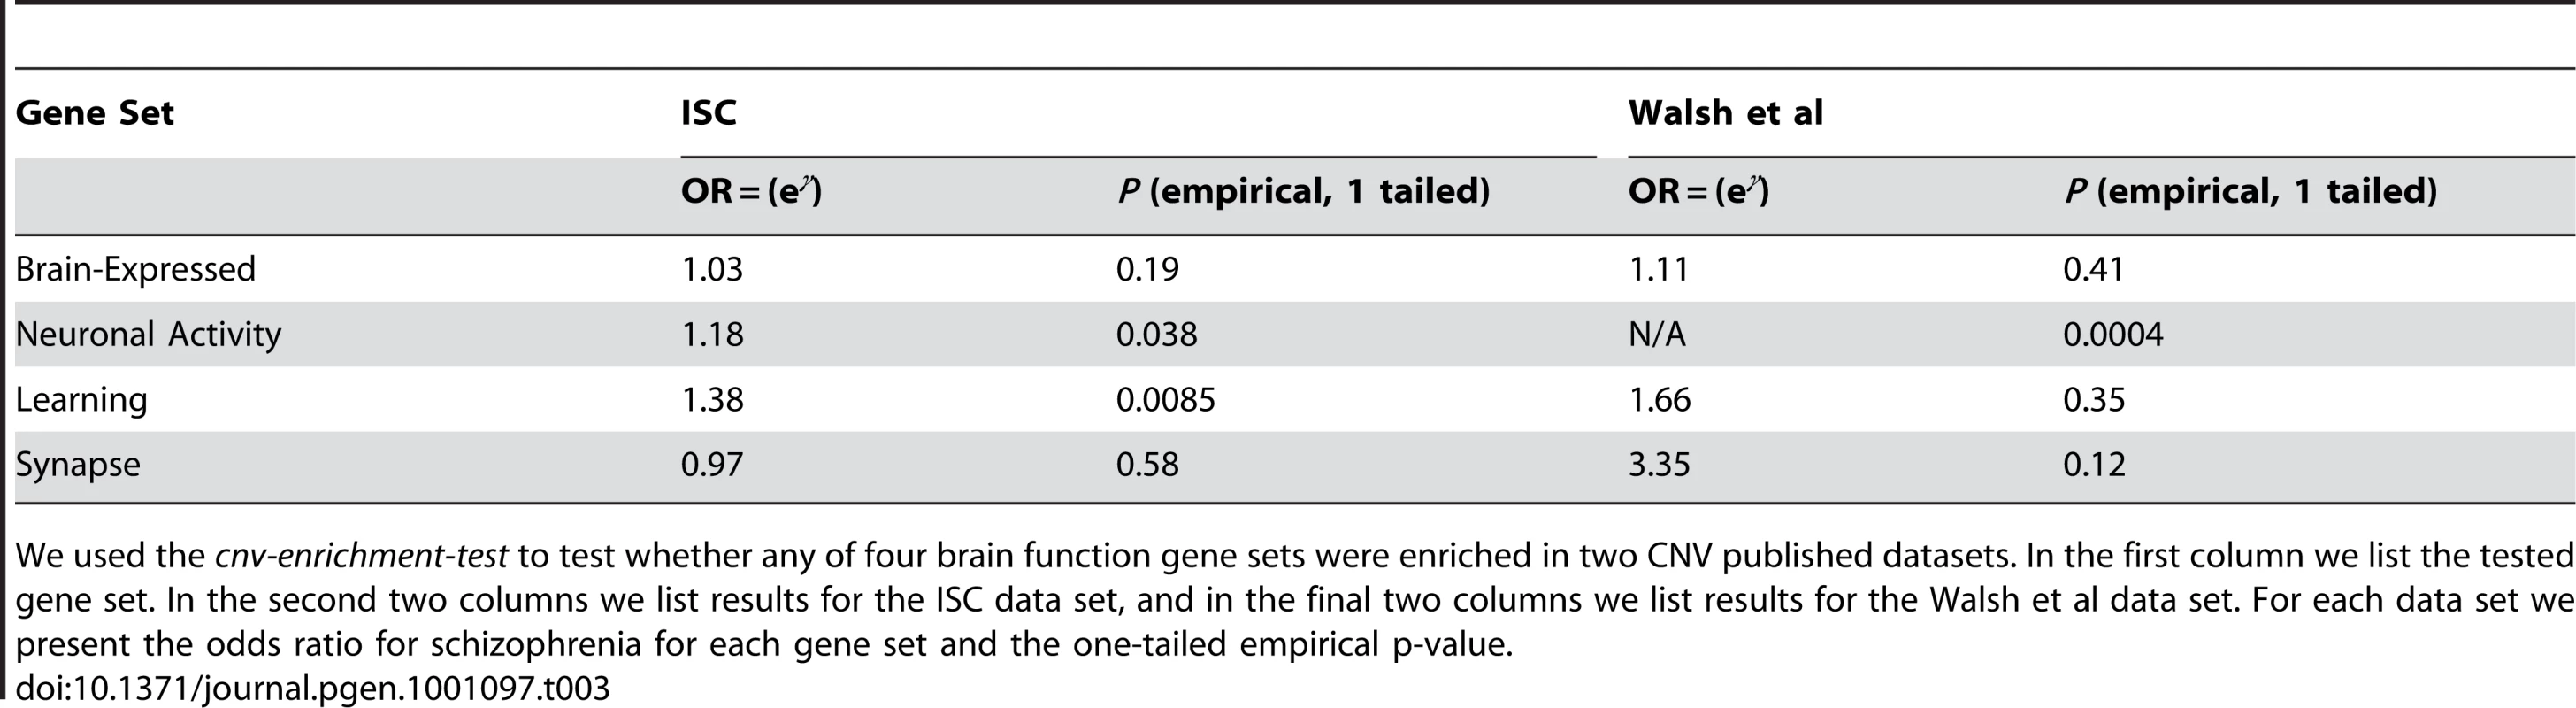 Assessing if brain-function genes increase schizophrenia risk in published CNV data sets.